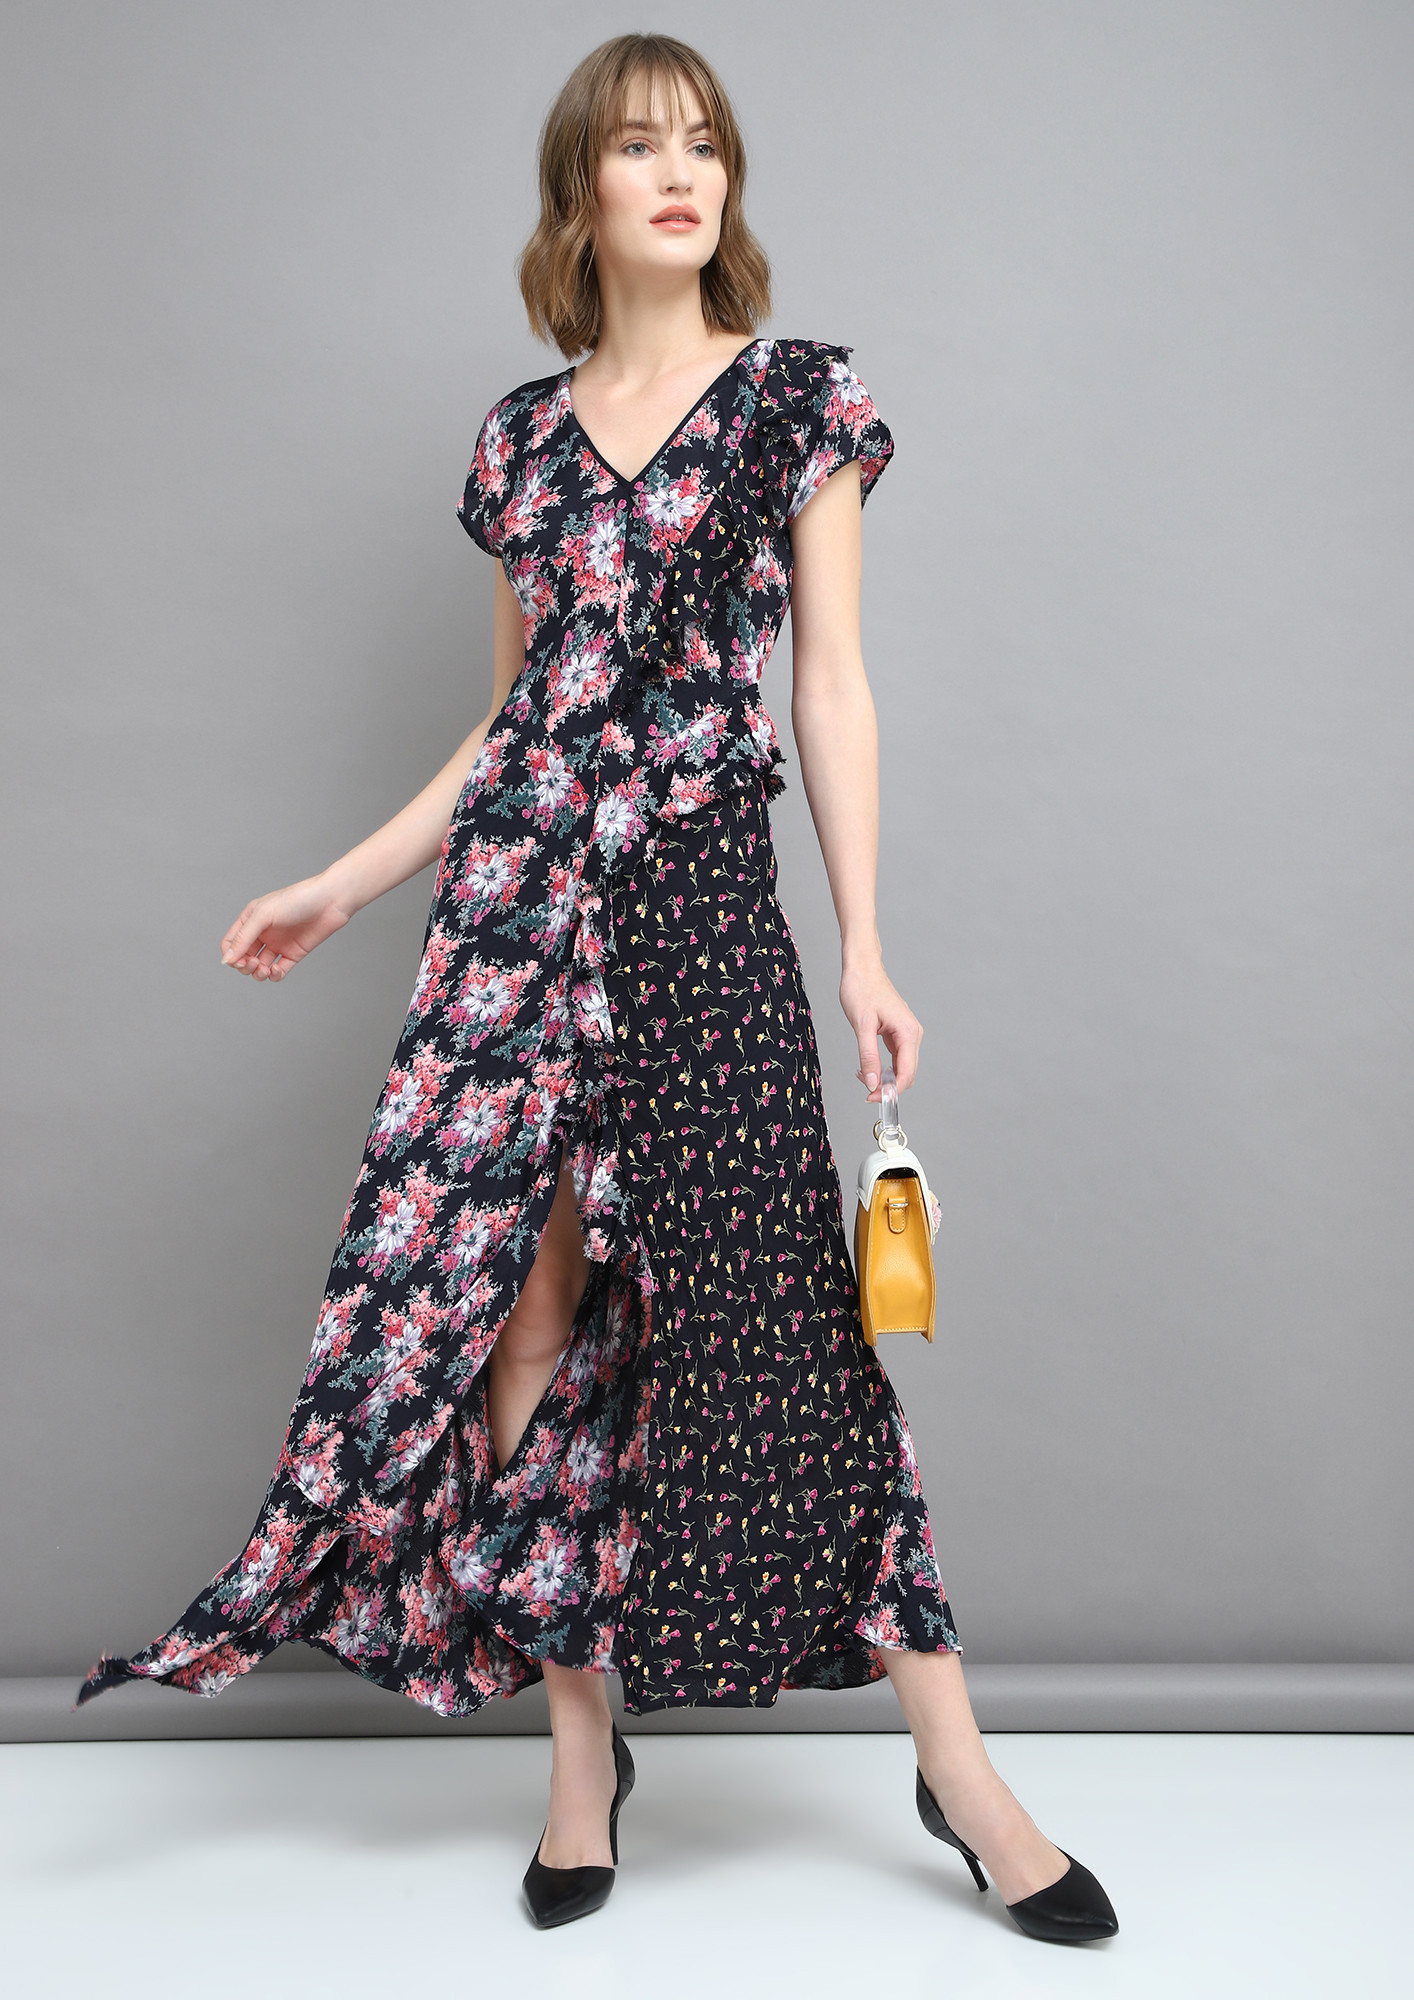 GROOVE WITH RUFFLES BLACK MAXI DRESS